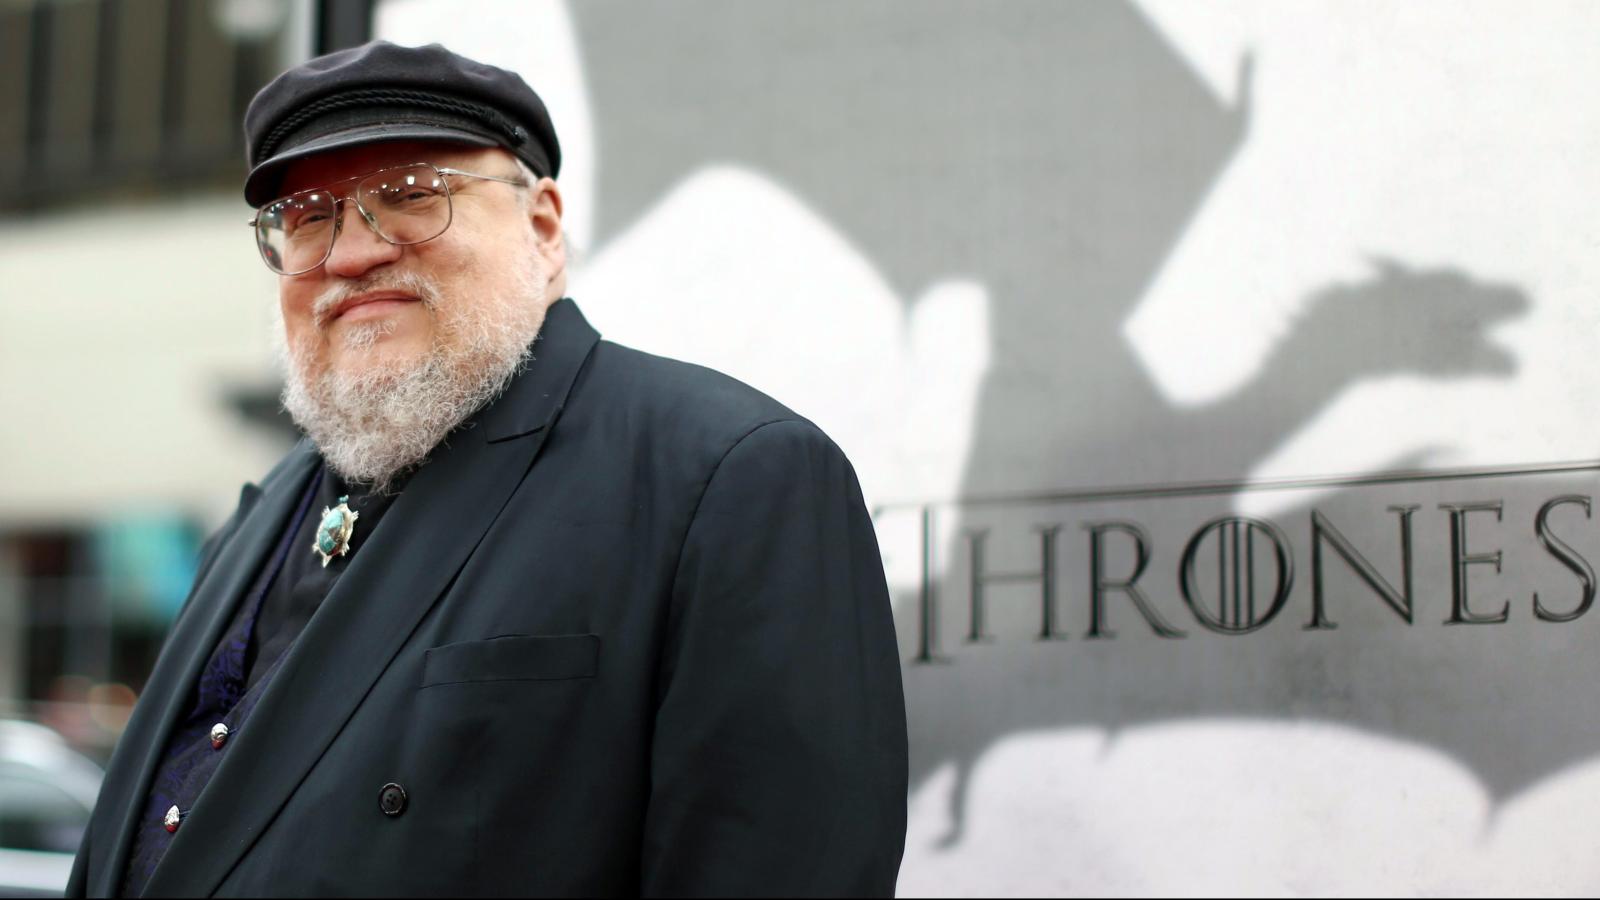 George RR Martin on 'The Winds of Winter' Release Updates